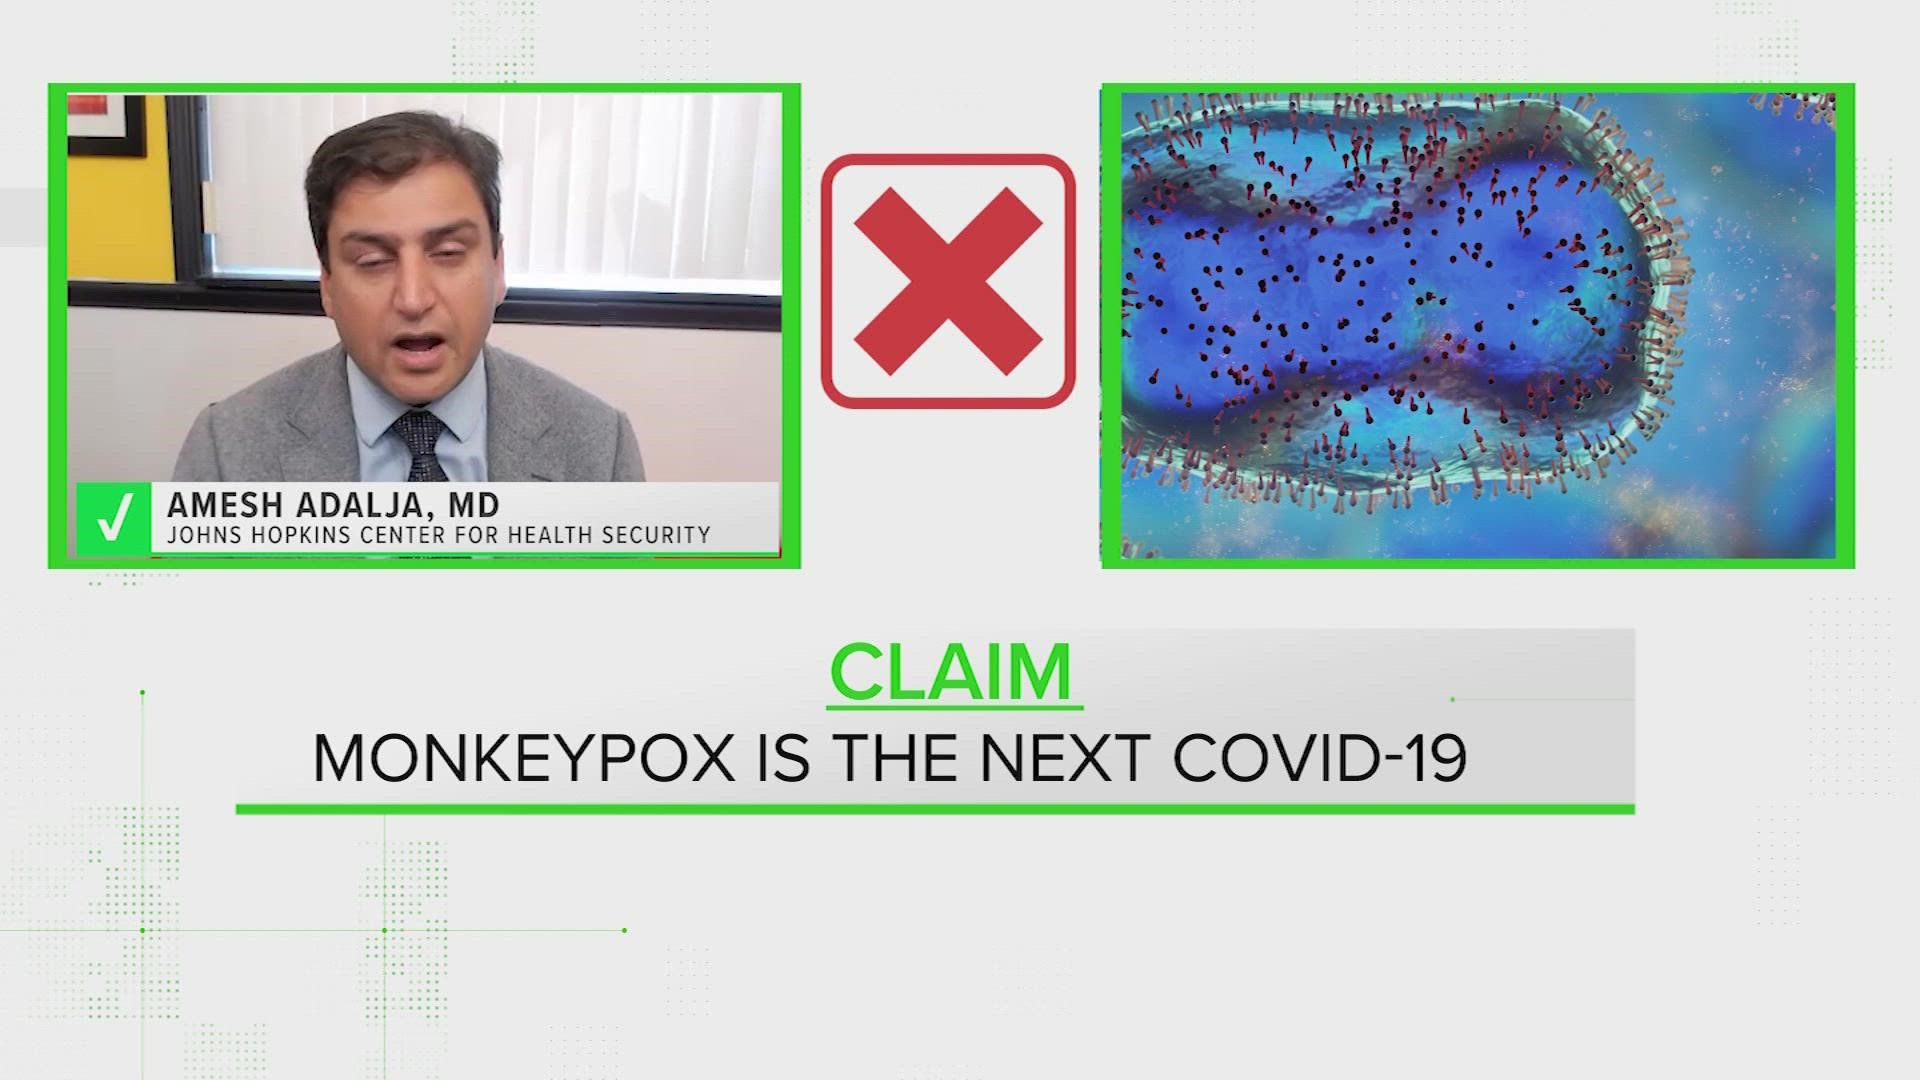 Dr. Amesh Adalja, senior scholar at Johns Hopkins Center for Health Security, answers questions about the monkeypox.